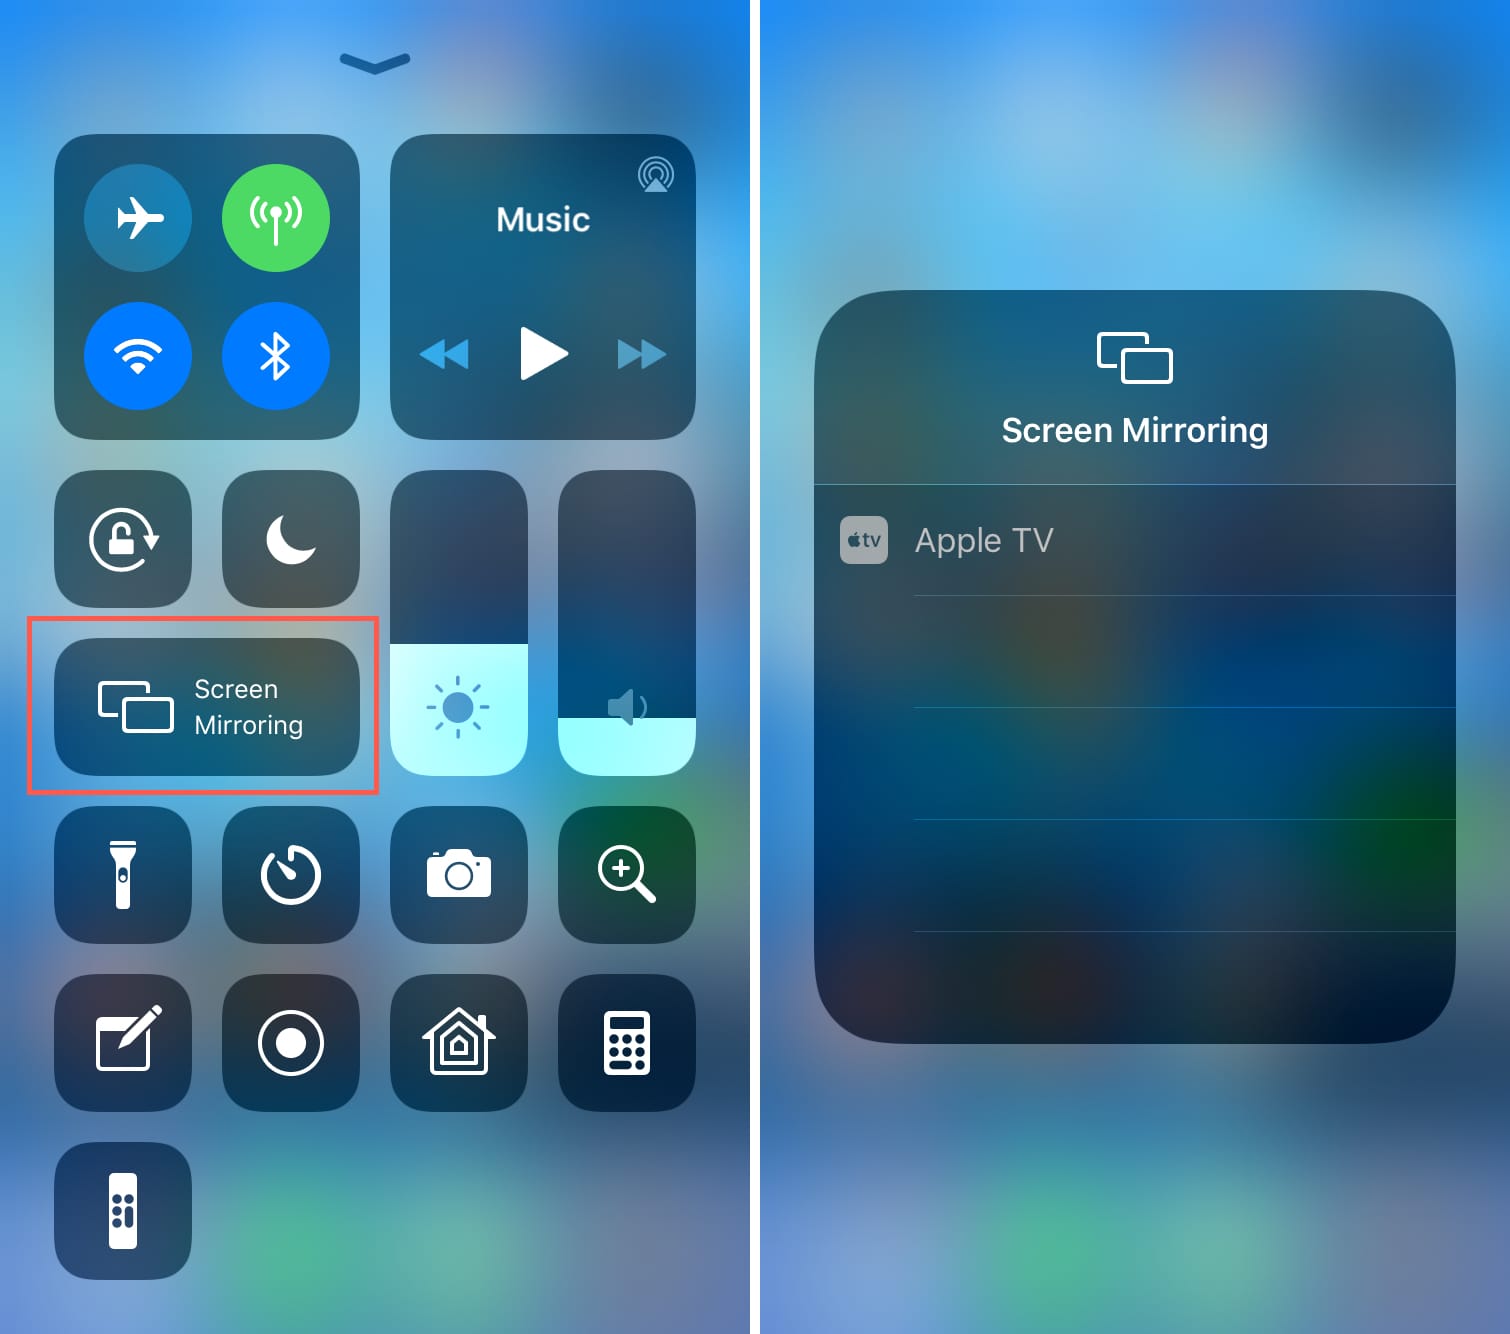 Start Screen Mirroring to Apple TV from iPhone